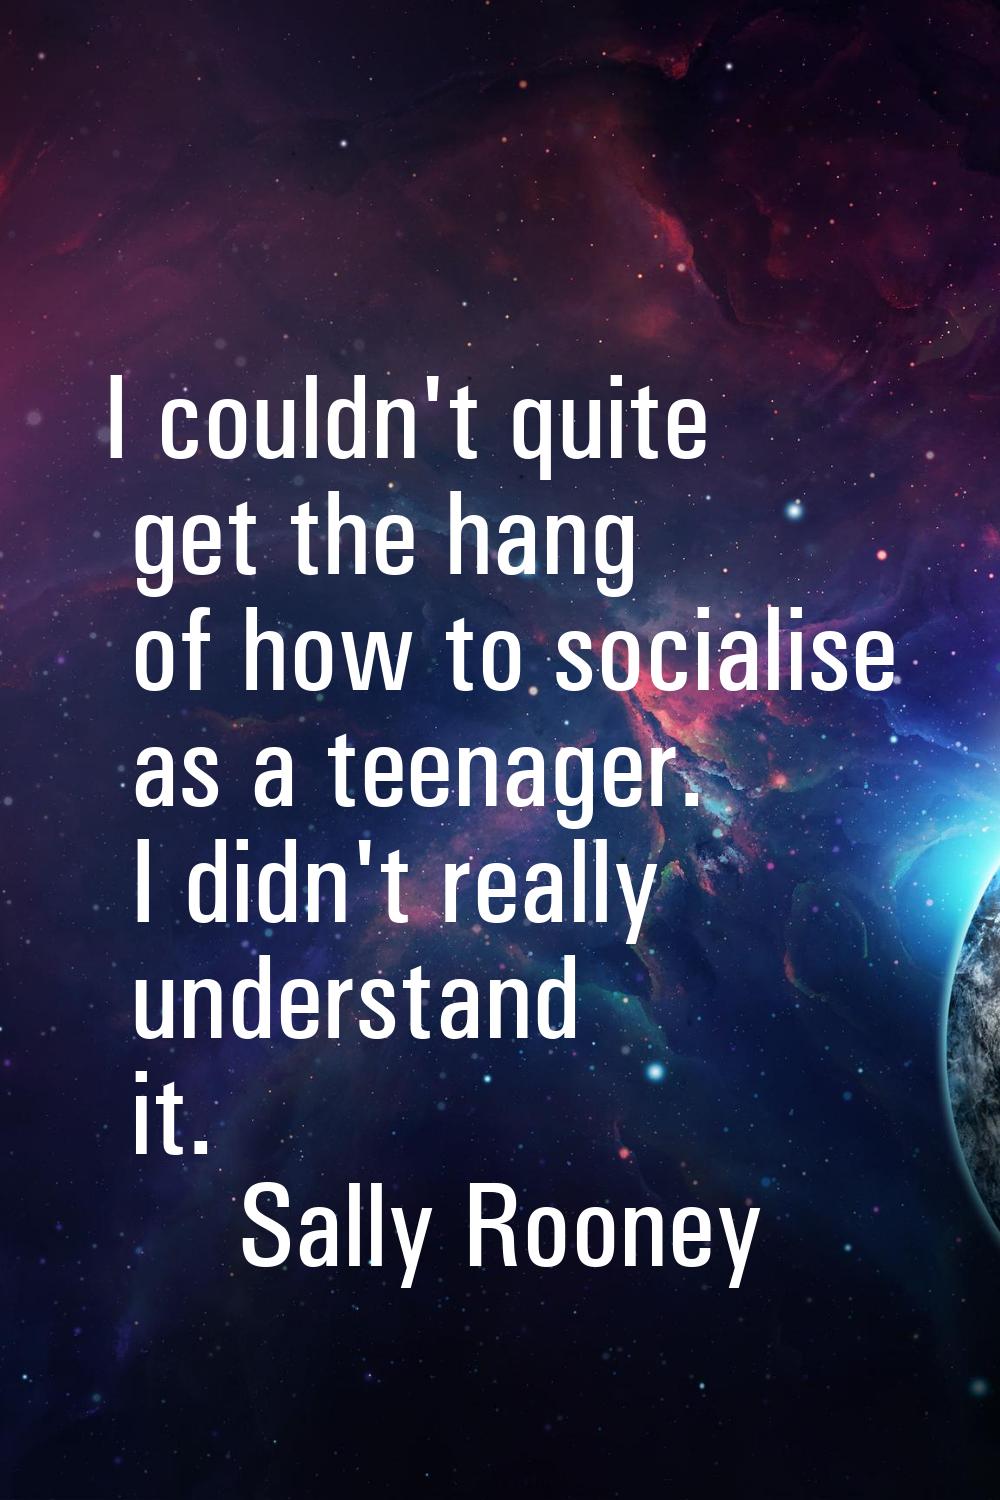 I couldn't quite get the hang of how to socialise as a teenager. I didn't really understand it.